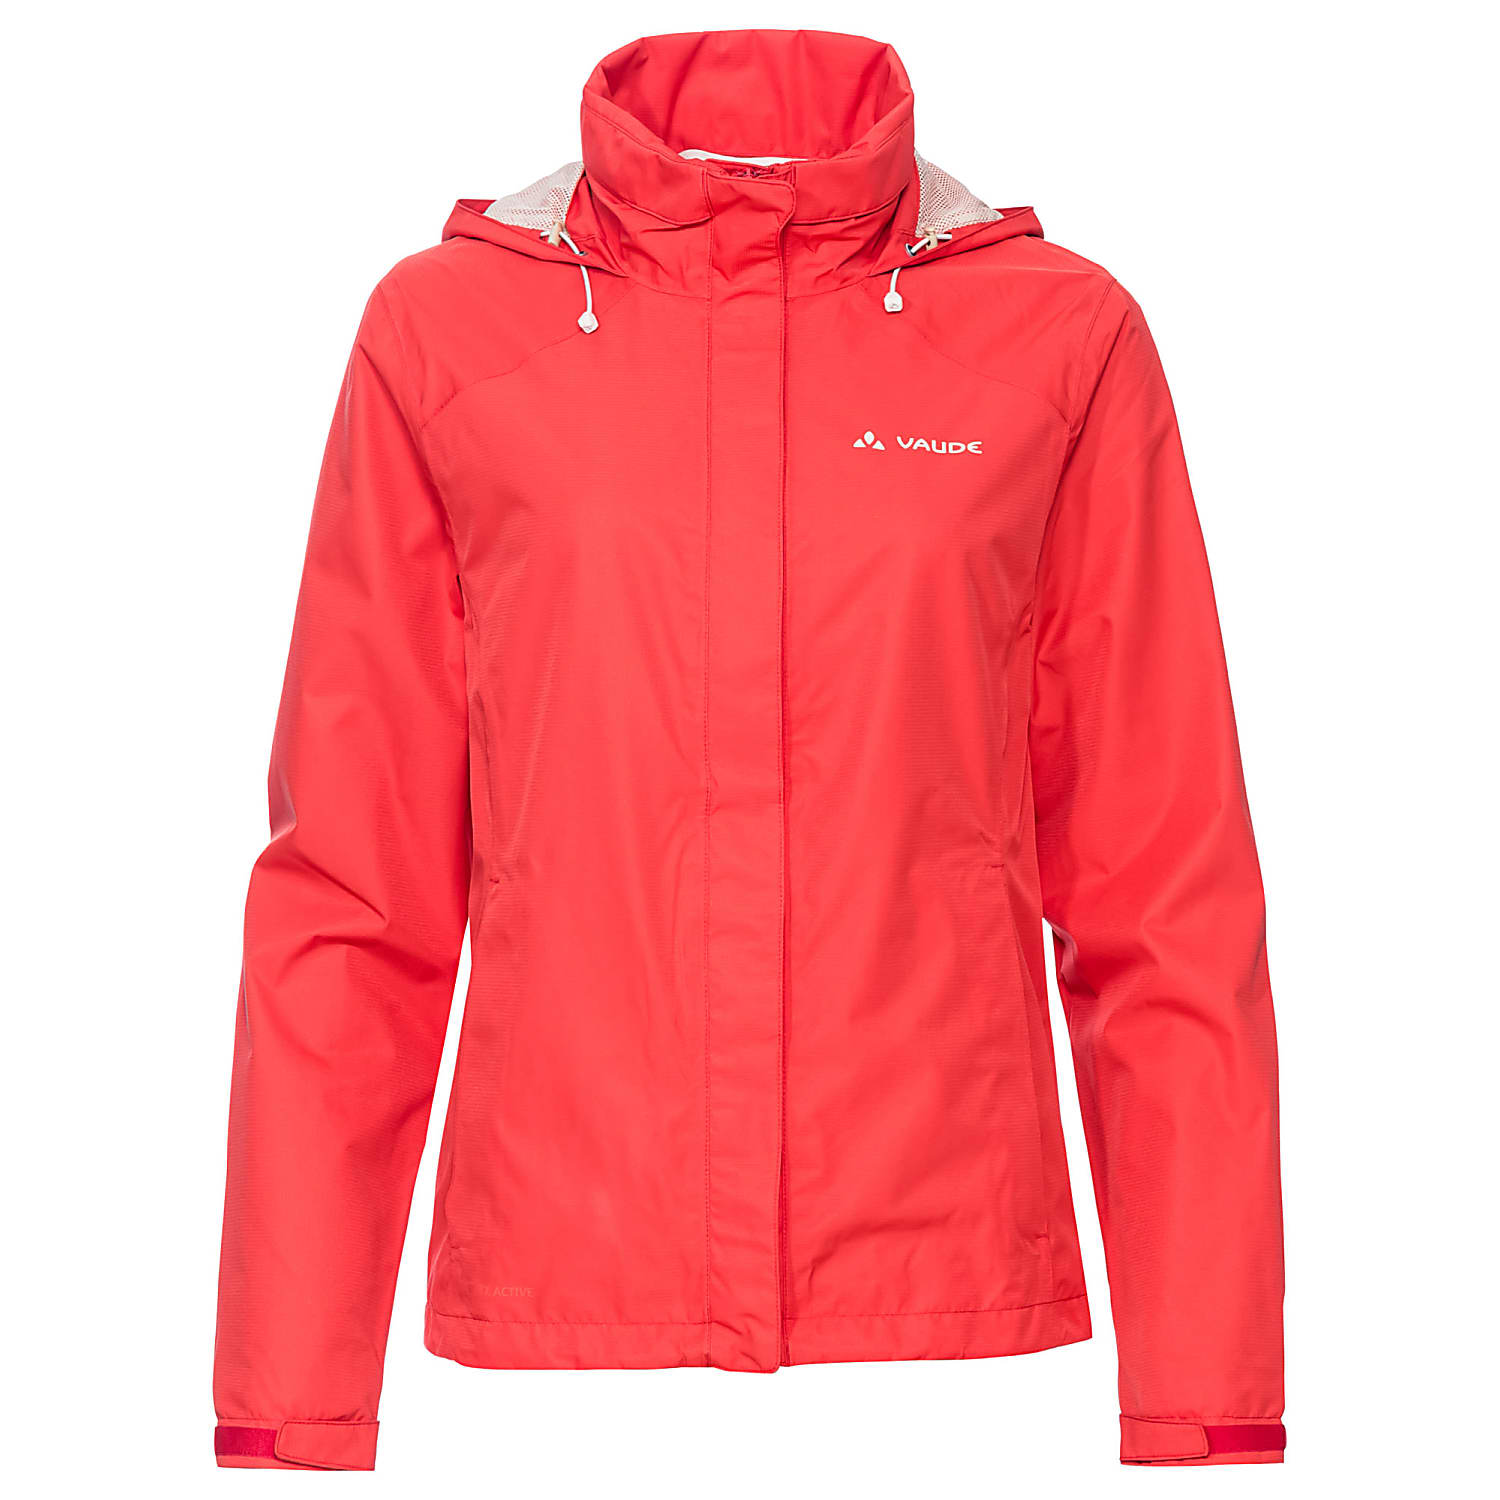 Vaude WOMENS ESCAPE BIKE shipping JACKET, Flame LIGHT - Fast cheap and